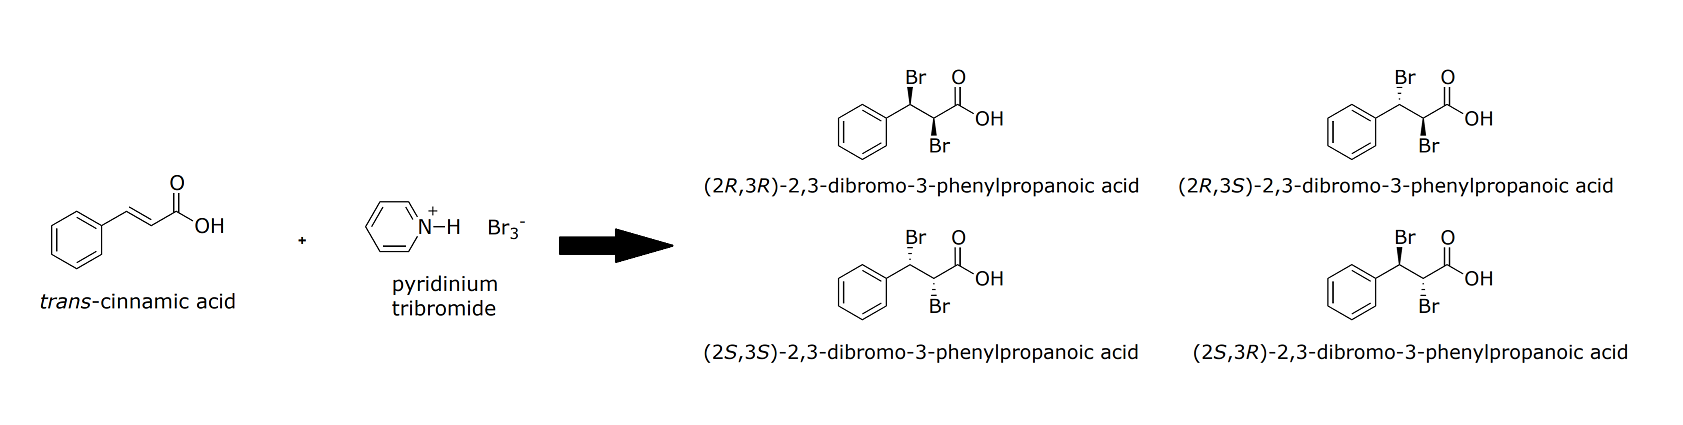 Part 1) Which of the four products of 2,3-dibromo-3-phenylpropanoic acid is...